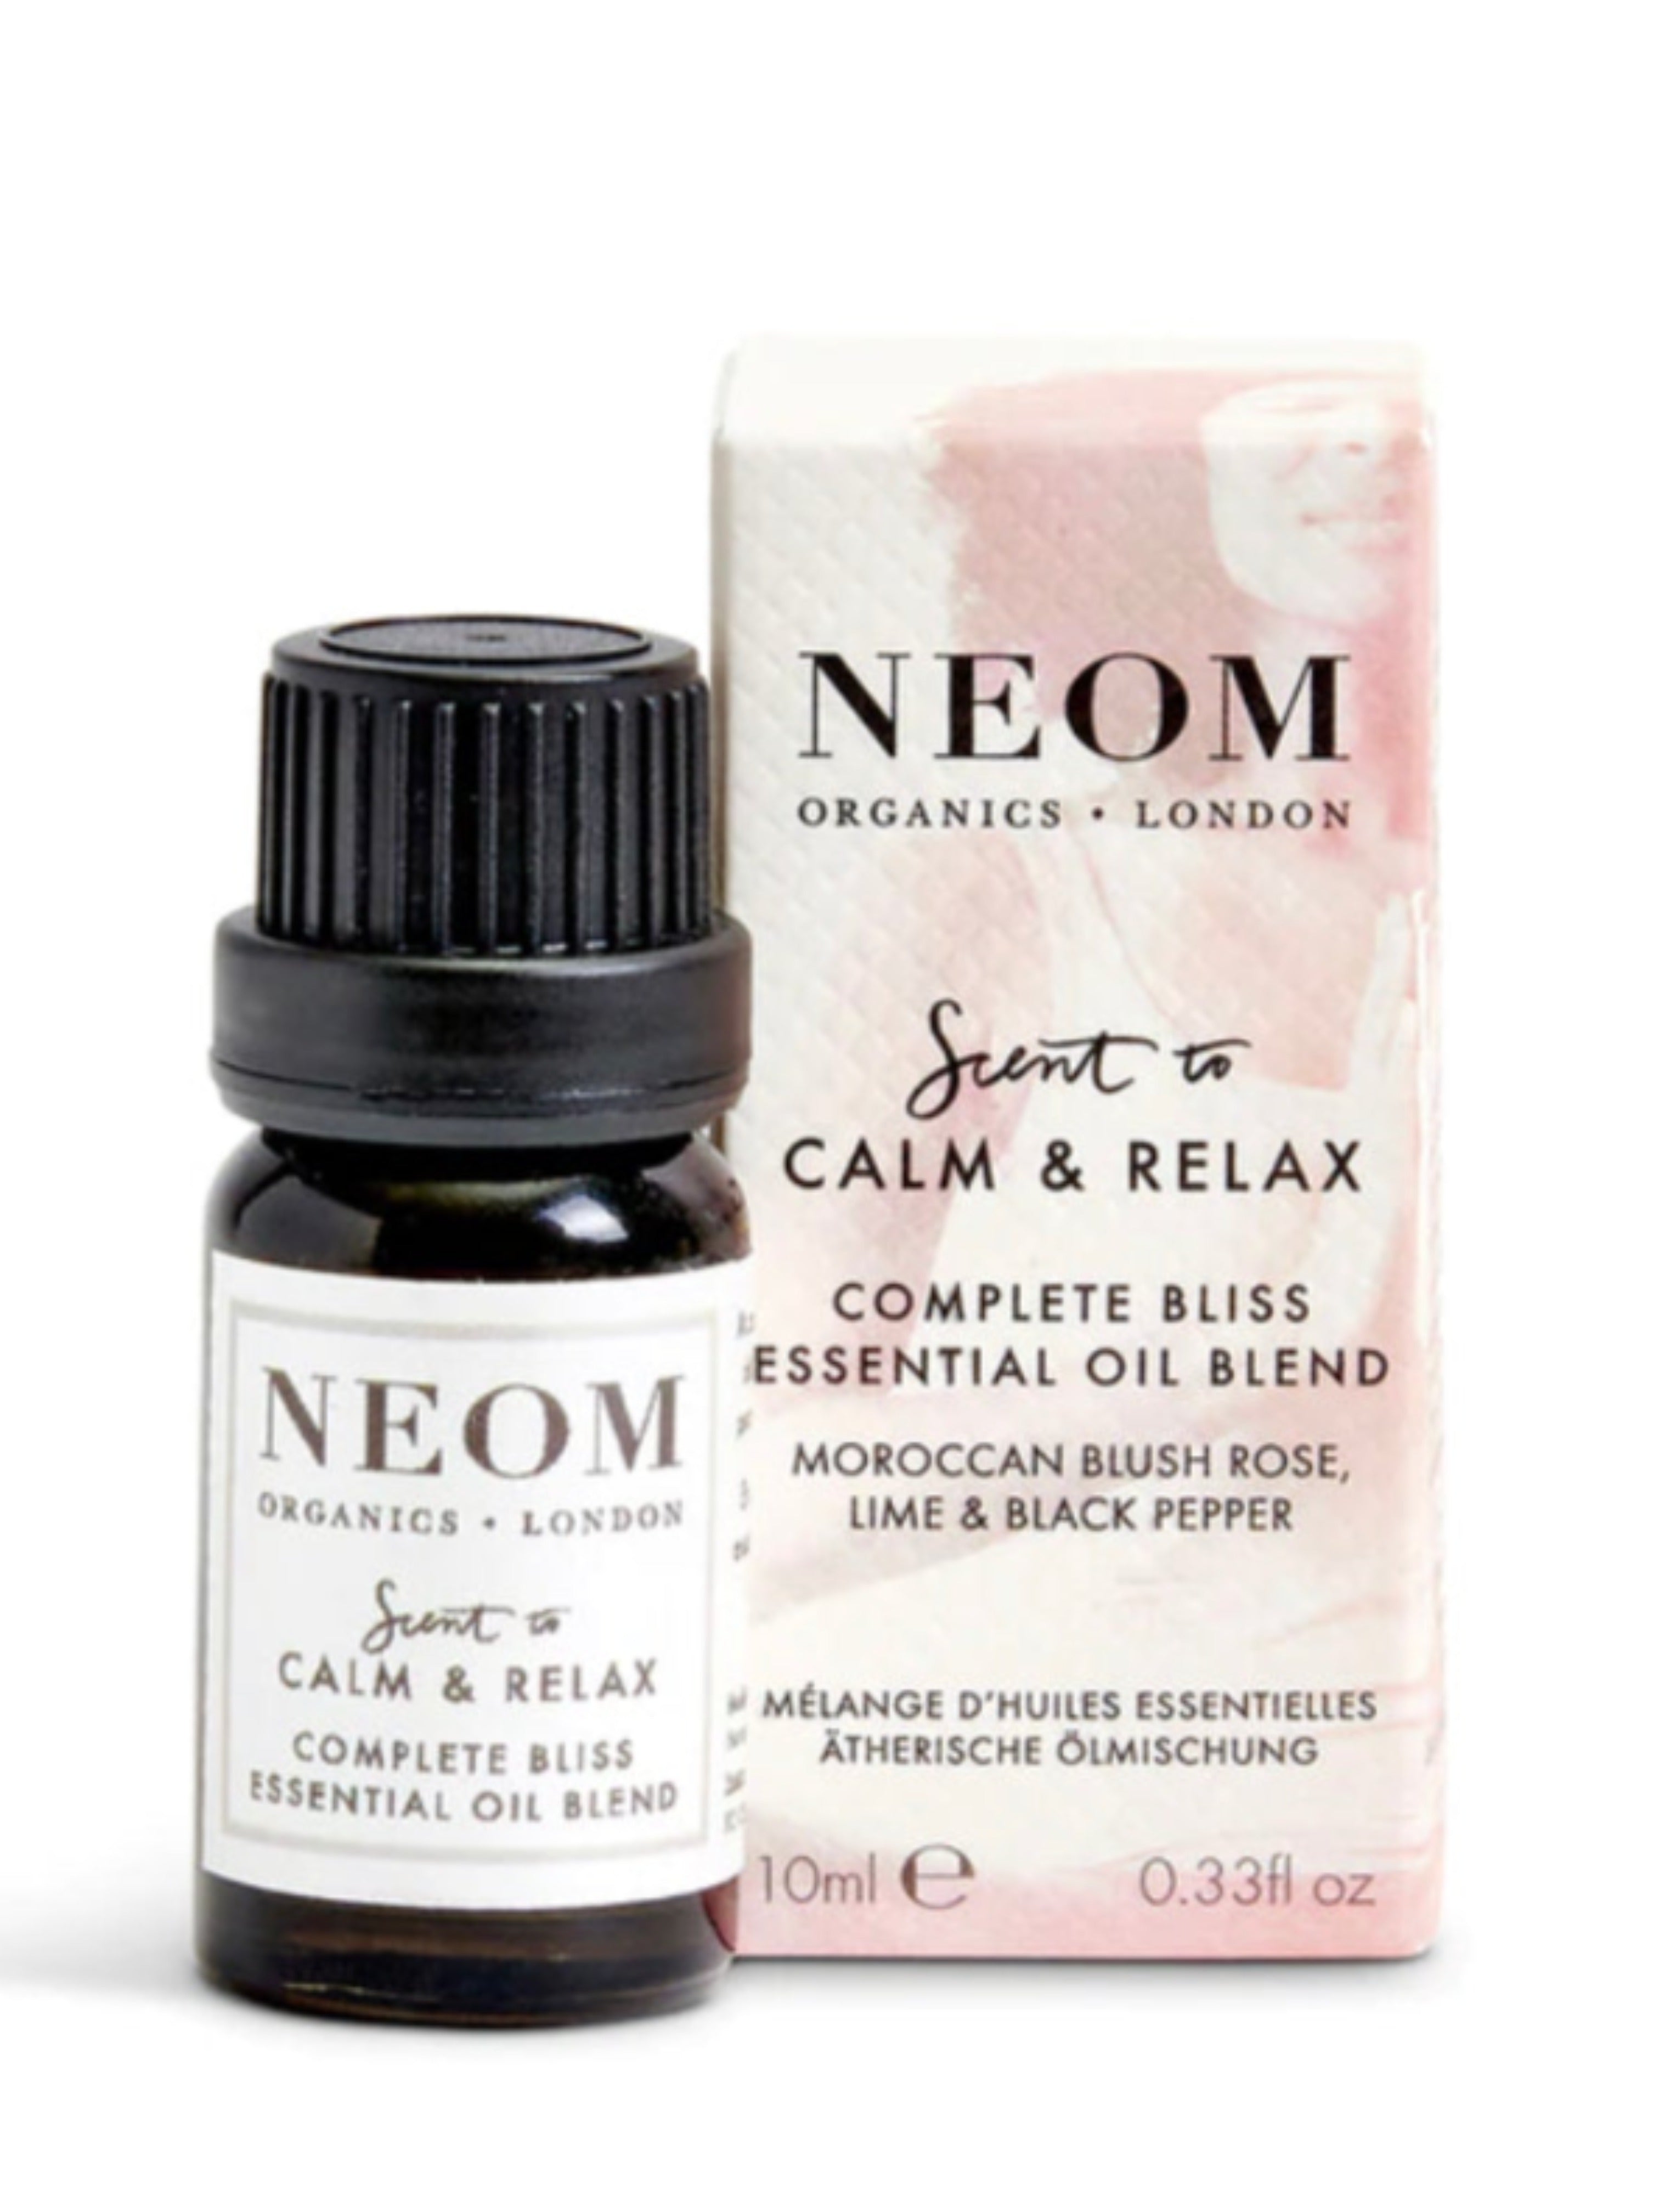 NEOM Complete Bliss Essential Oil Blend